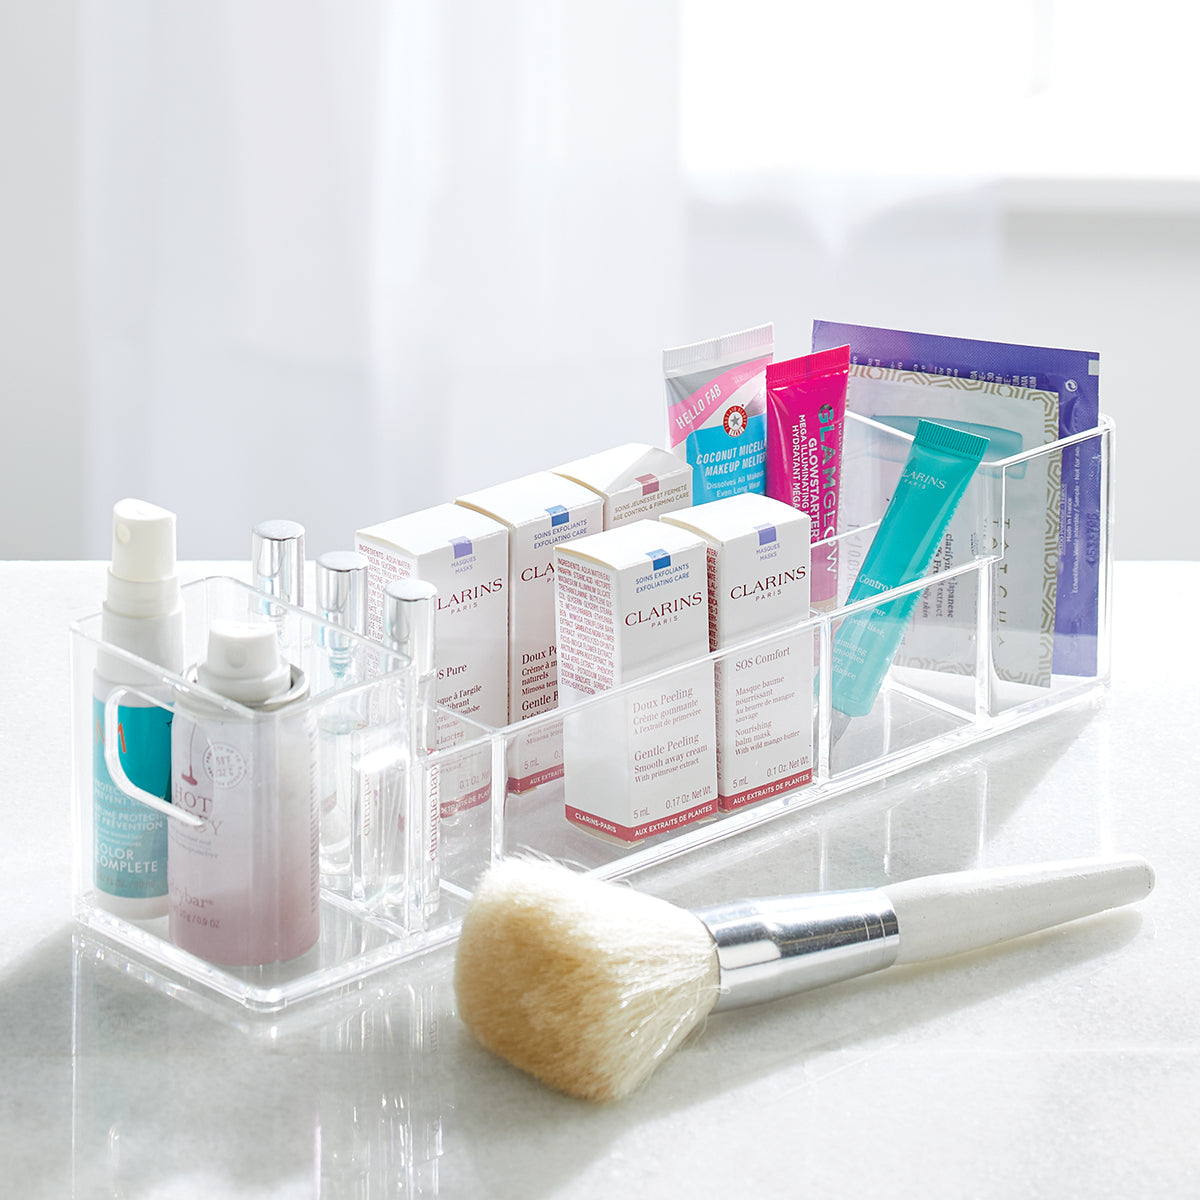 Find the Makeup Organizer Fit for Beauty Samples